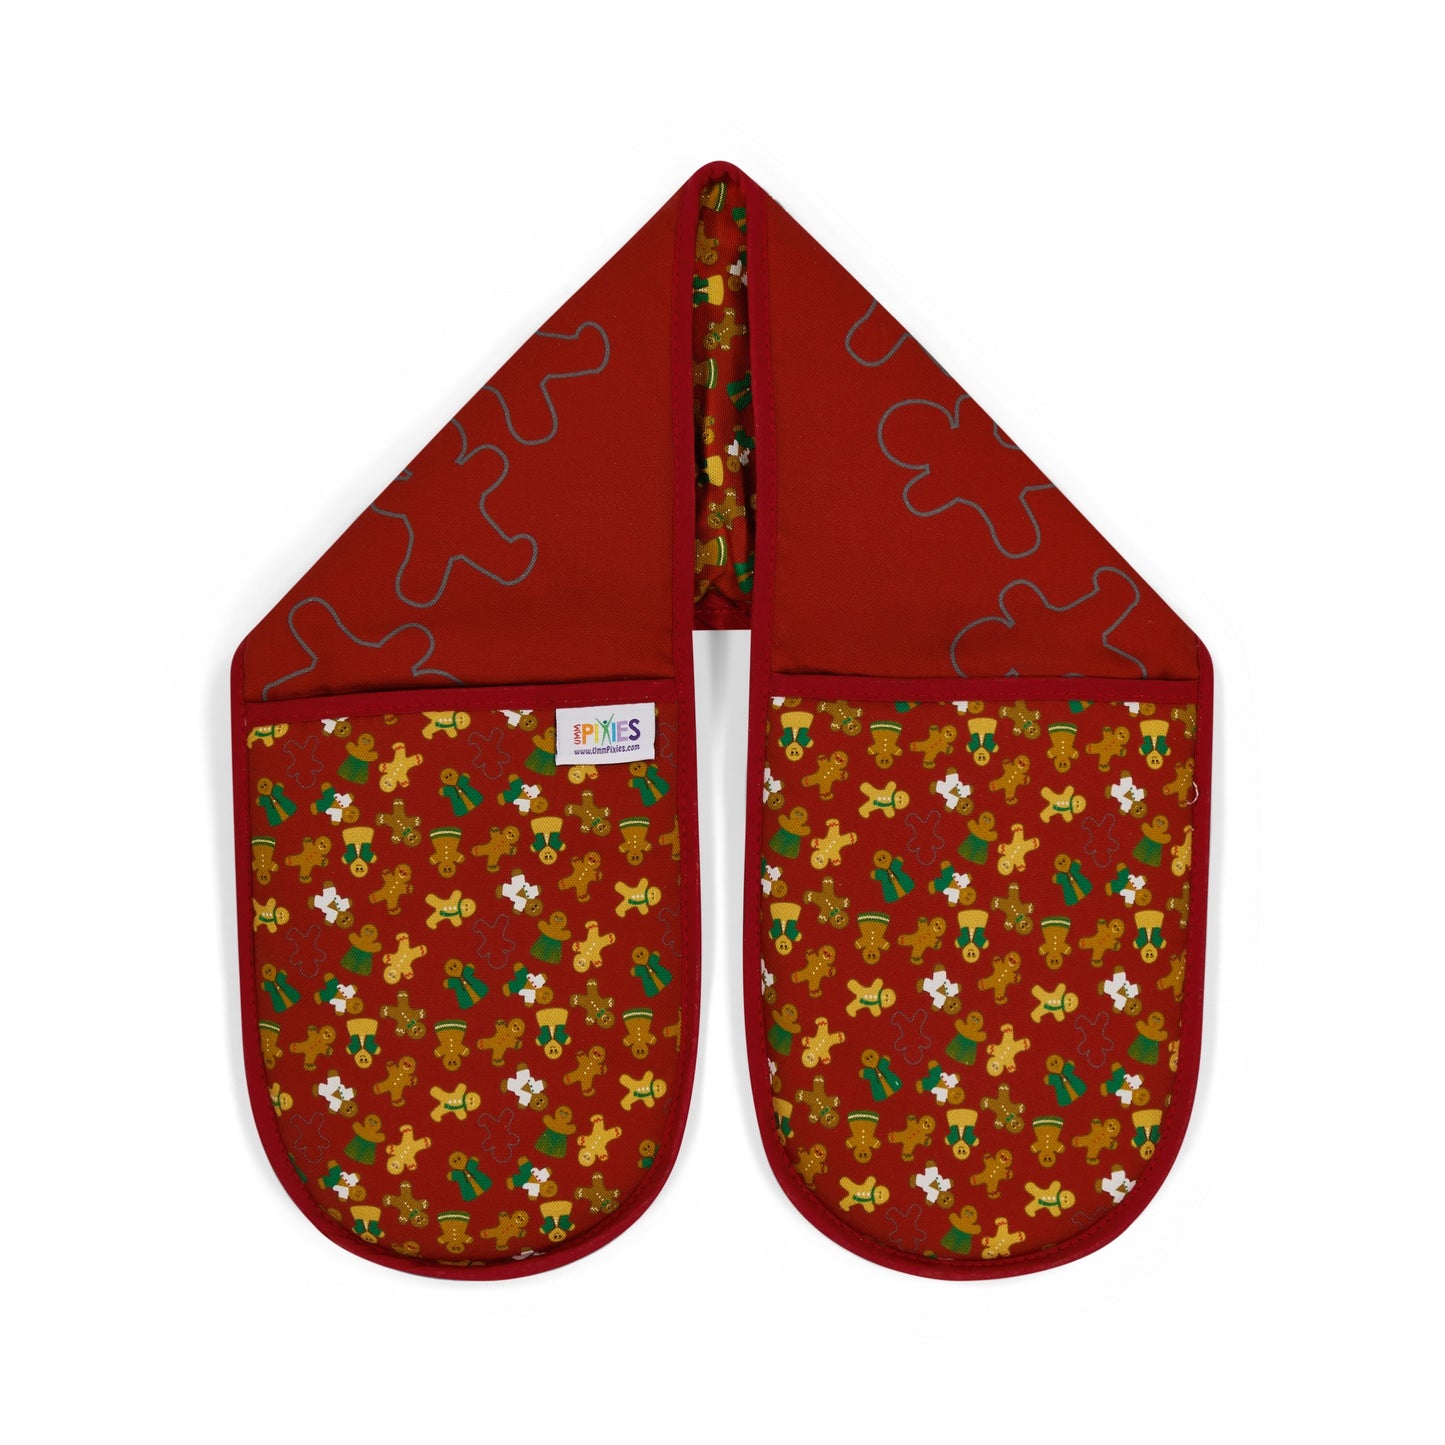 Gingerbread Oven Gloves in Organic Cotton